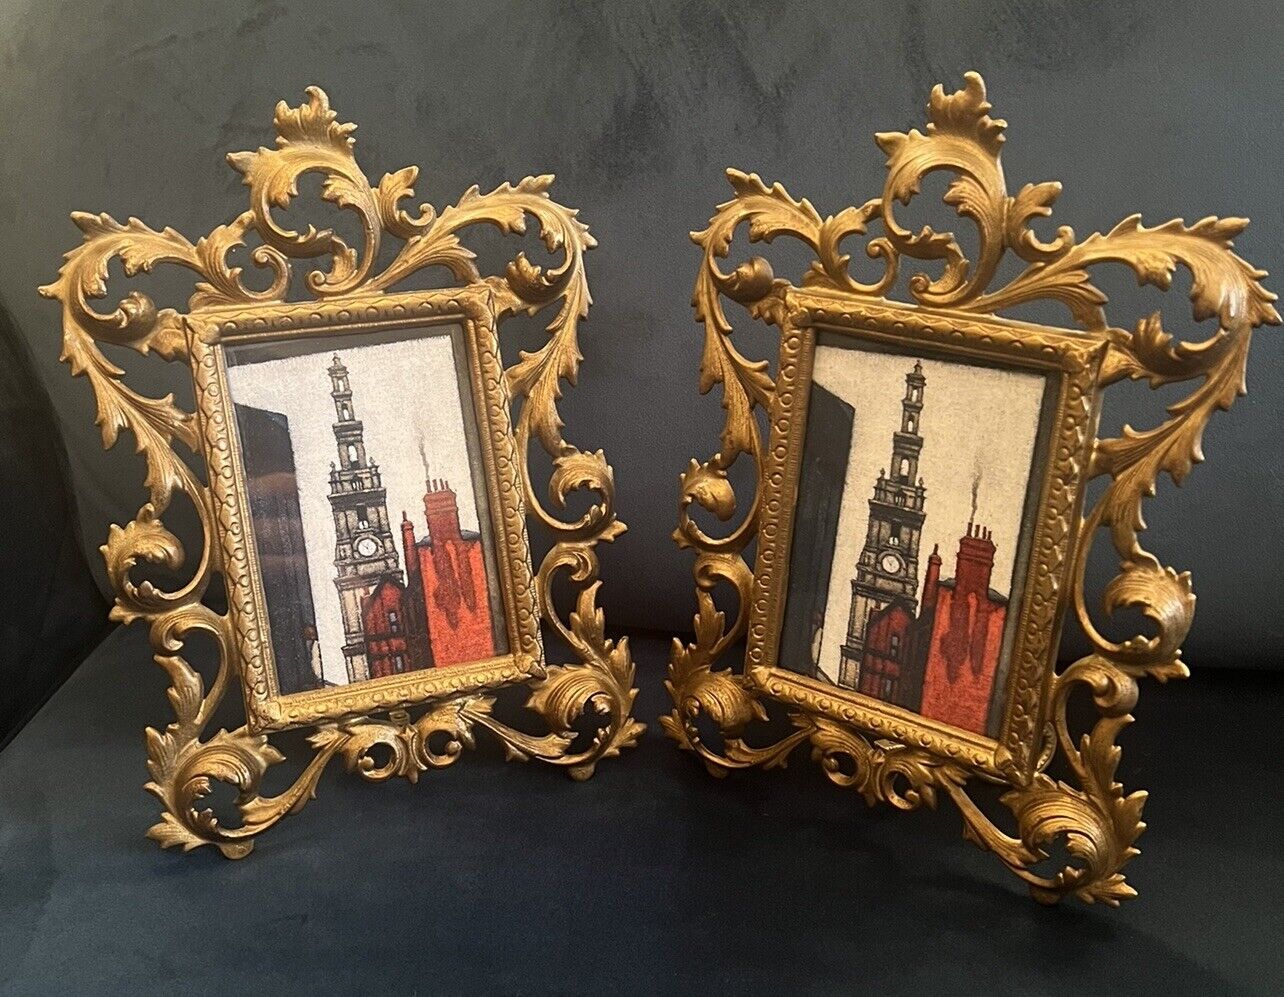 Fabulous Pair Of Edwardian Rococo Style Gilt Metal Picture Frames c1910